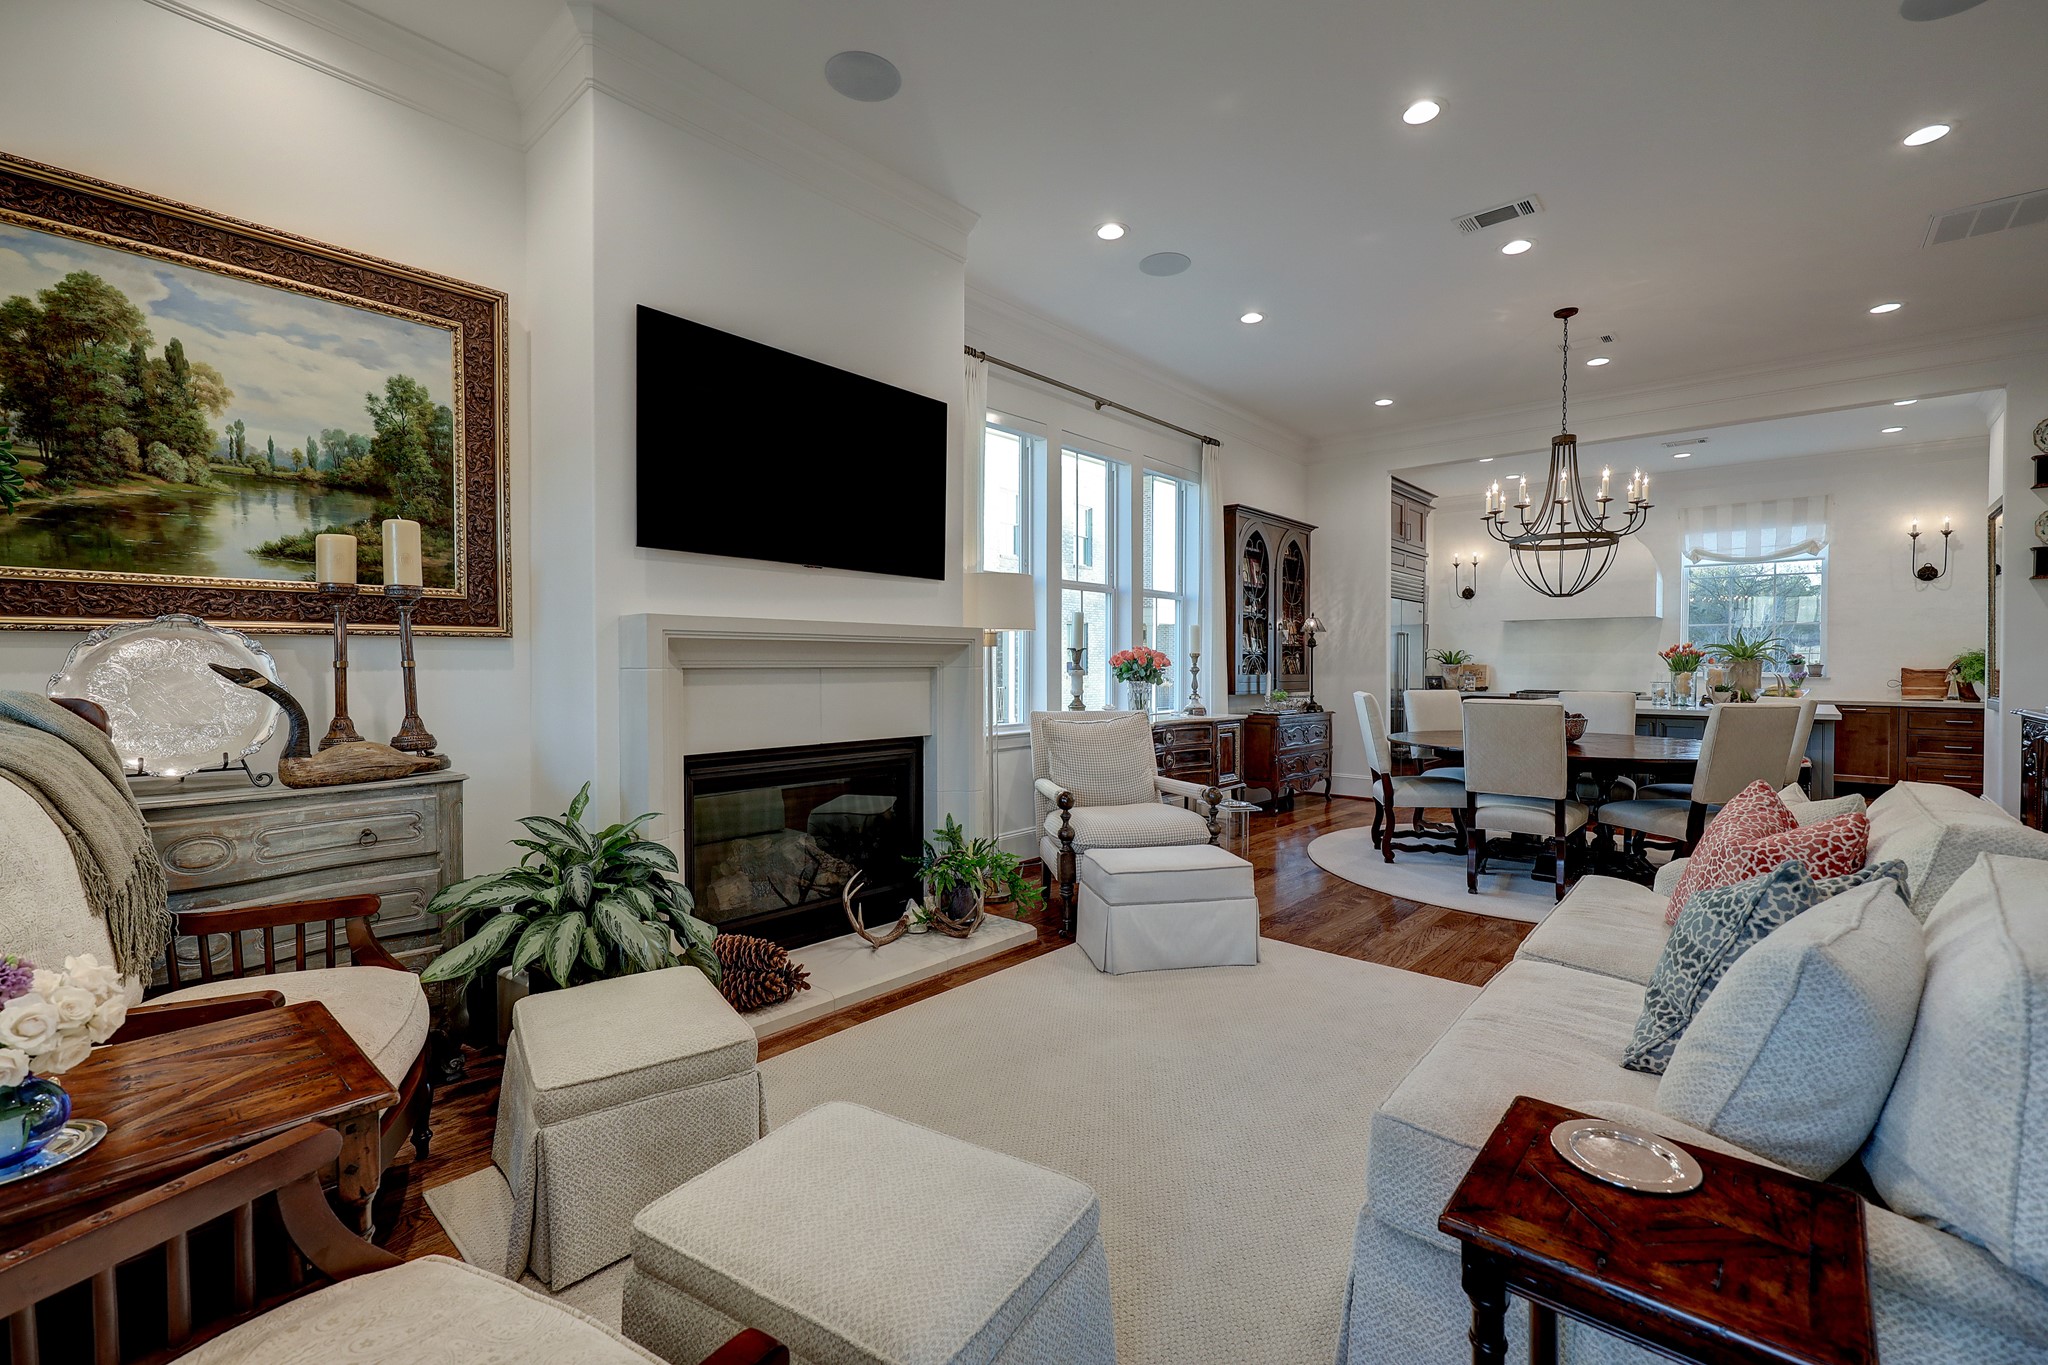 Relax with your loved ones or entertain guests in your spacious living room boasting an elegant limestone gas log fireplace with extra wide hearth, recessed lighting, refined French doors to your private veranda, a TV mount, and art light.